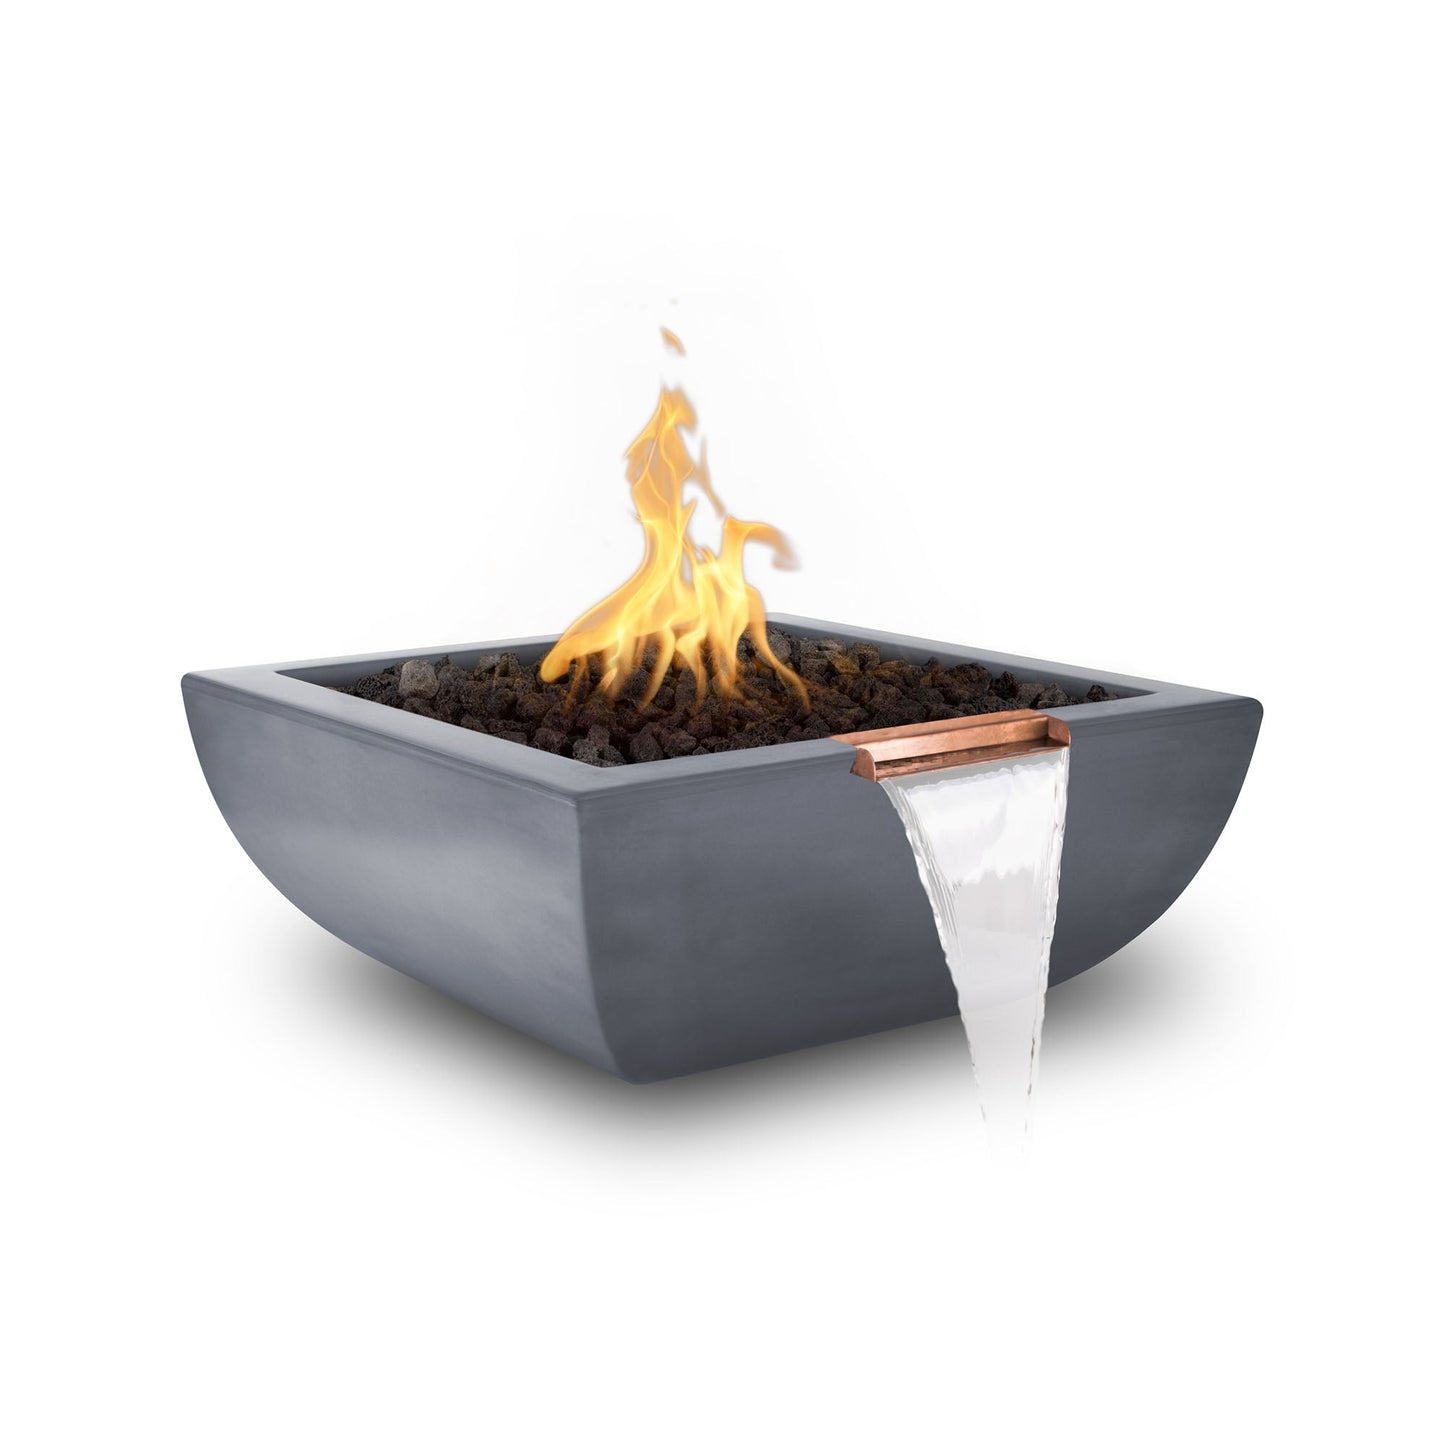 The Outdoor Plus Square Avalon 36" Rustic Coffee GFRC Concrete Liquid Propane Fire & Water Bowl with Match Lit with Flame Sense Ignition